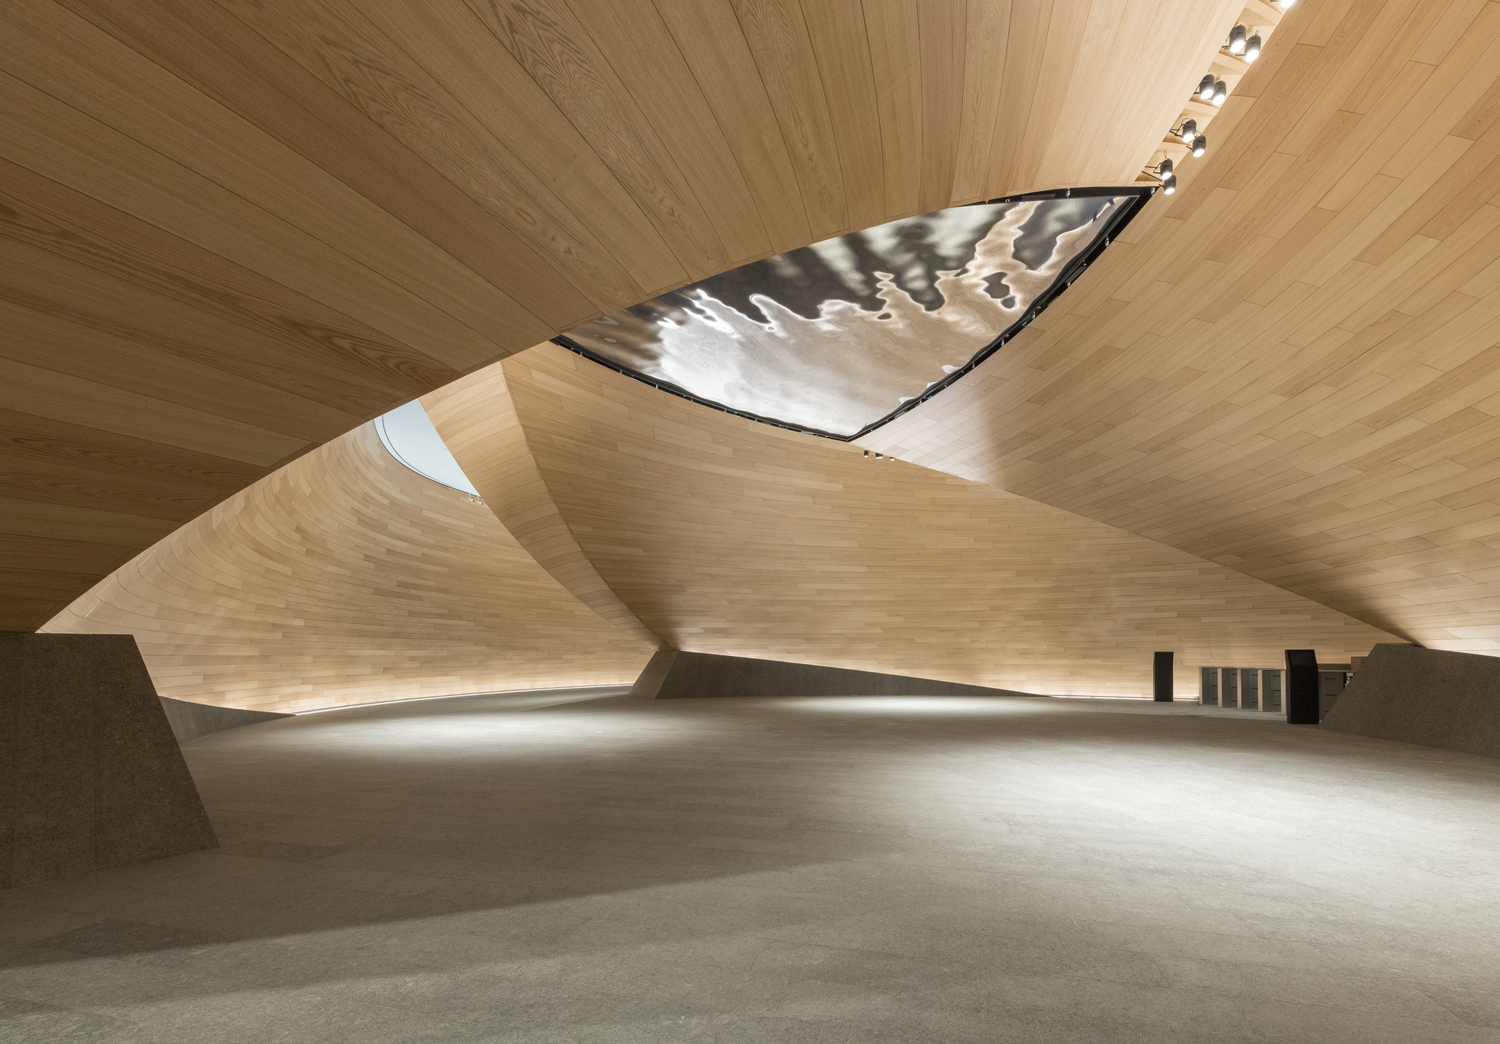 The main reception are leads to the "Vortex," a dramatic, double-height space created by three curved timber shells